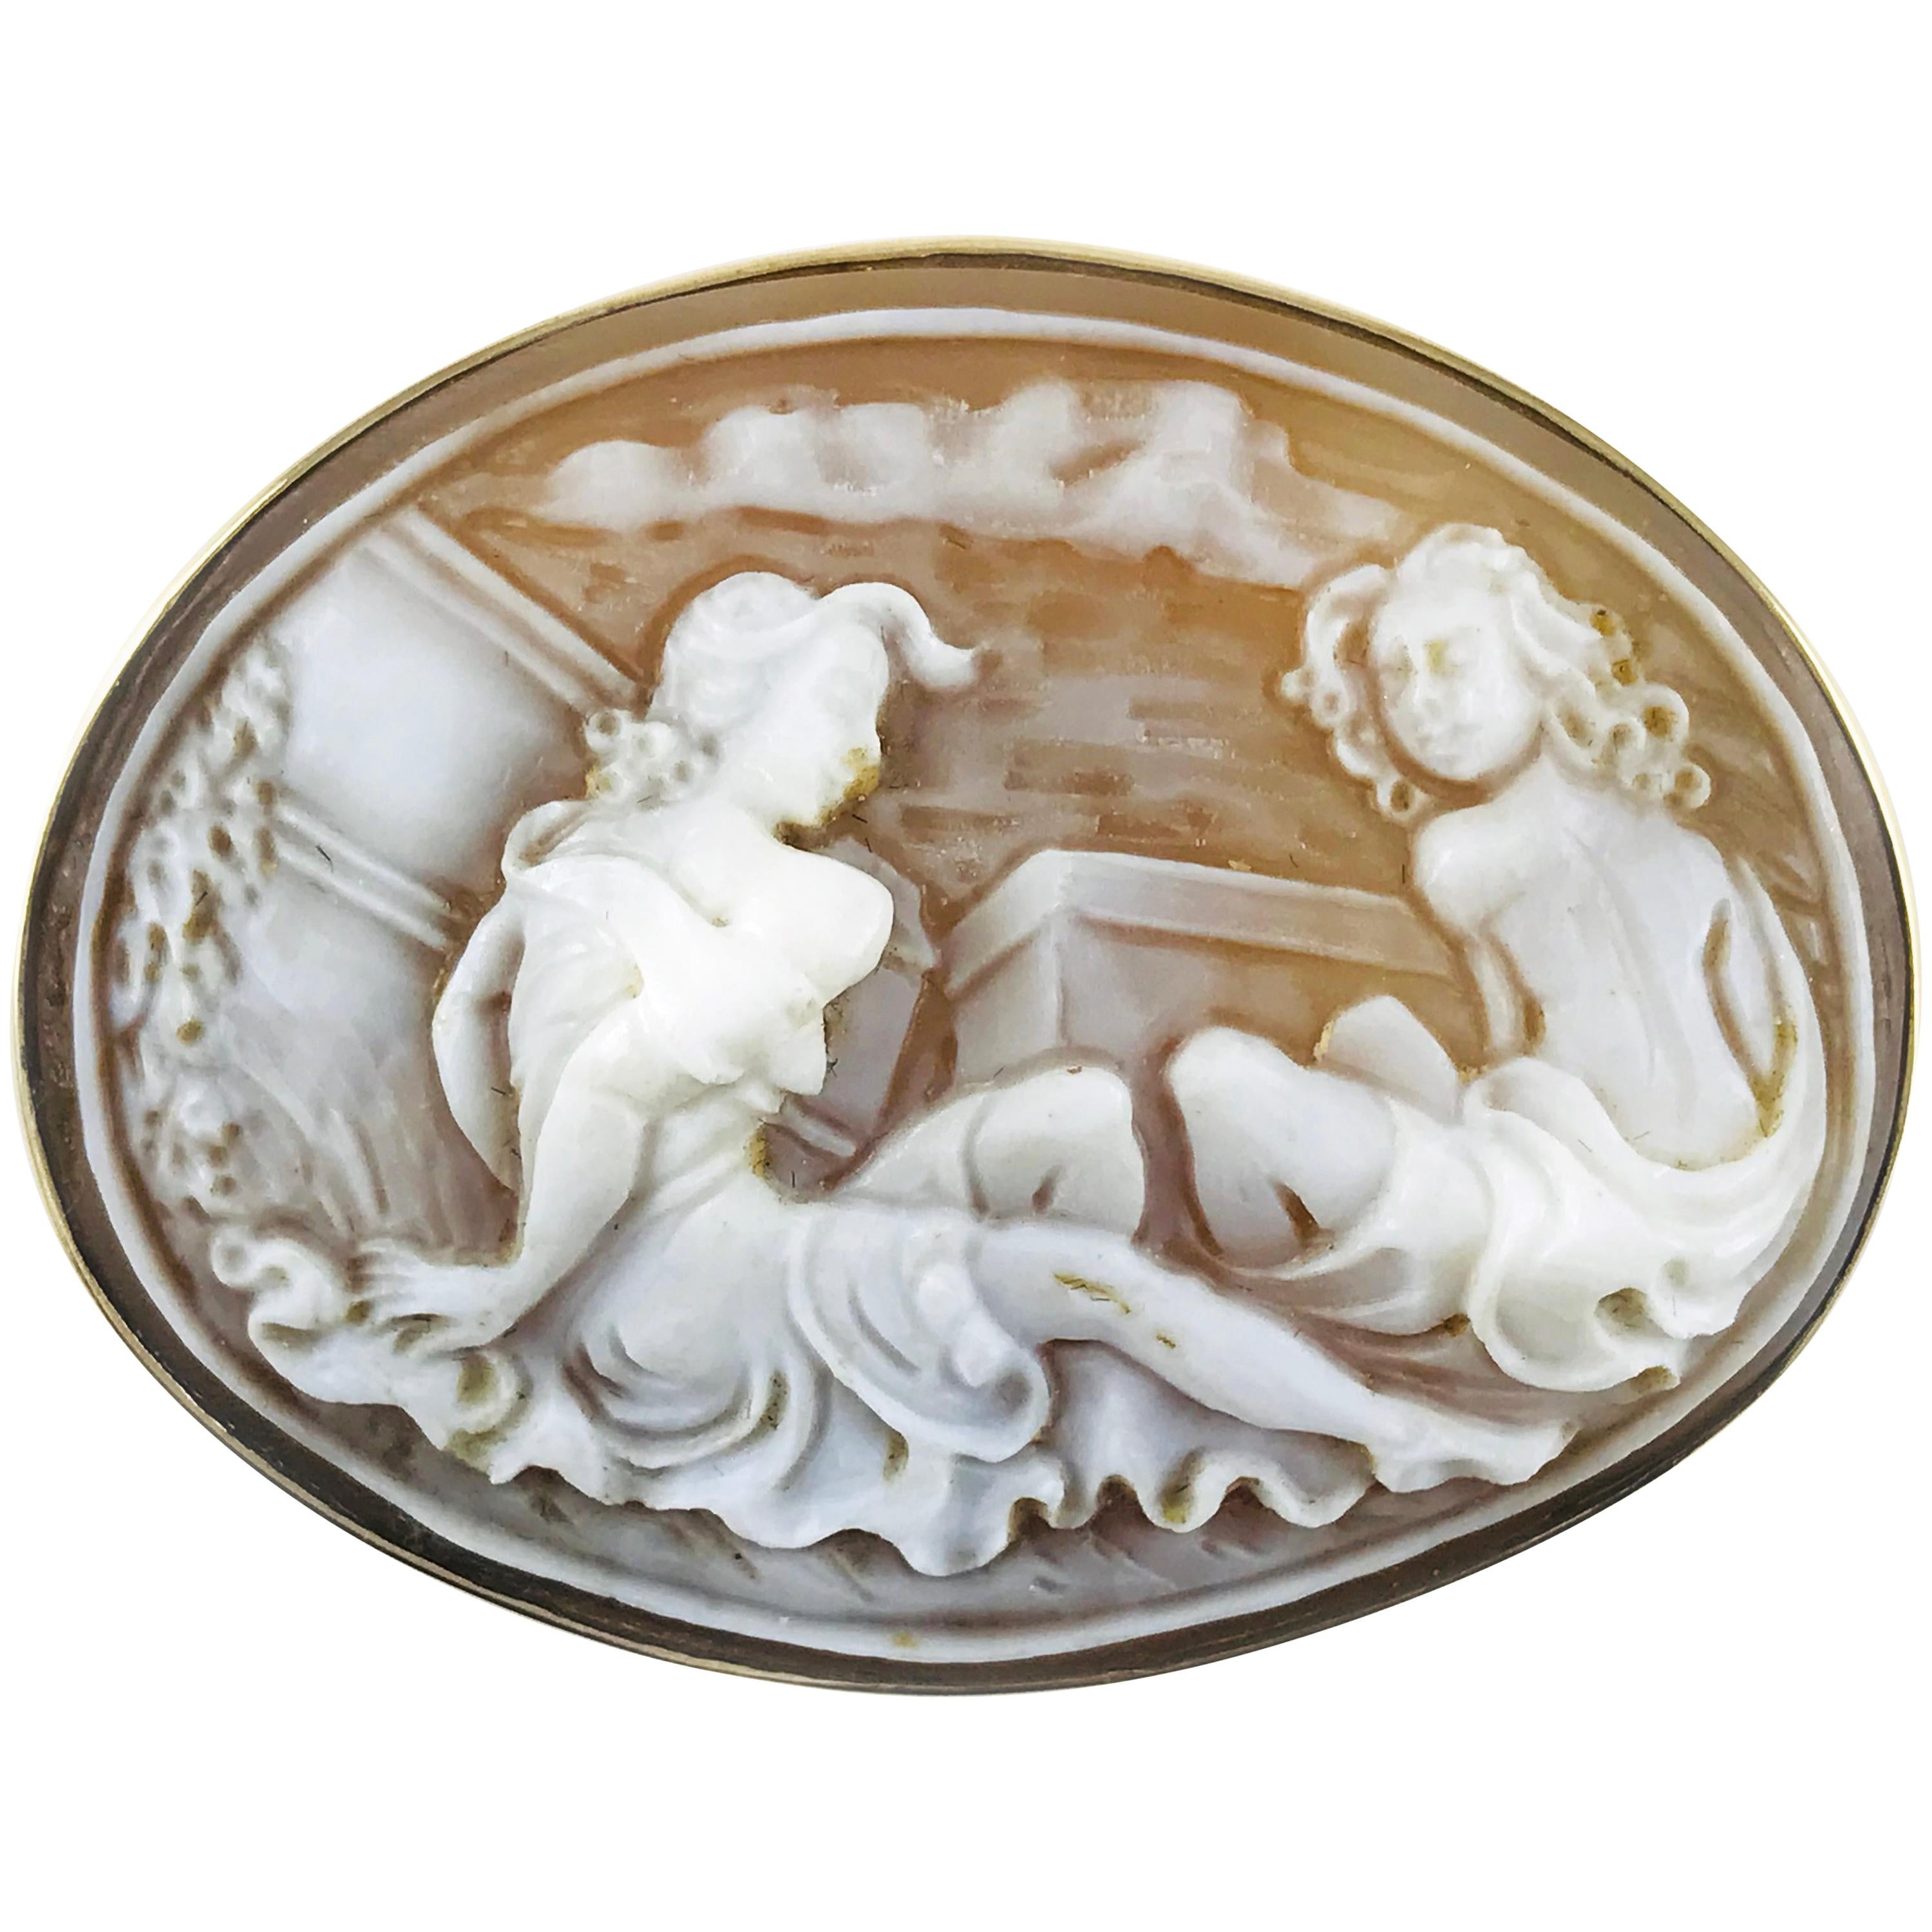 14 Karat Gold Shell Cameo Brooch Pendant, Sitting Pretty For Sale